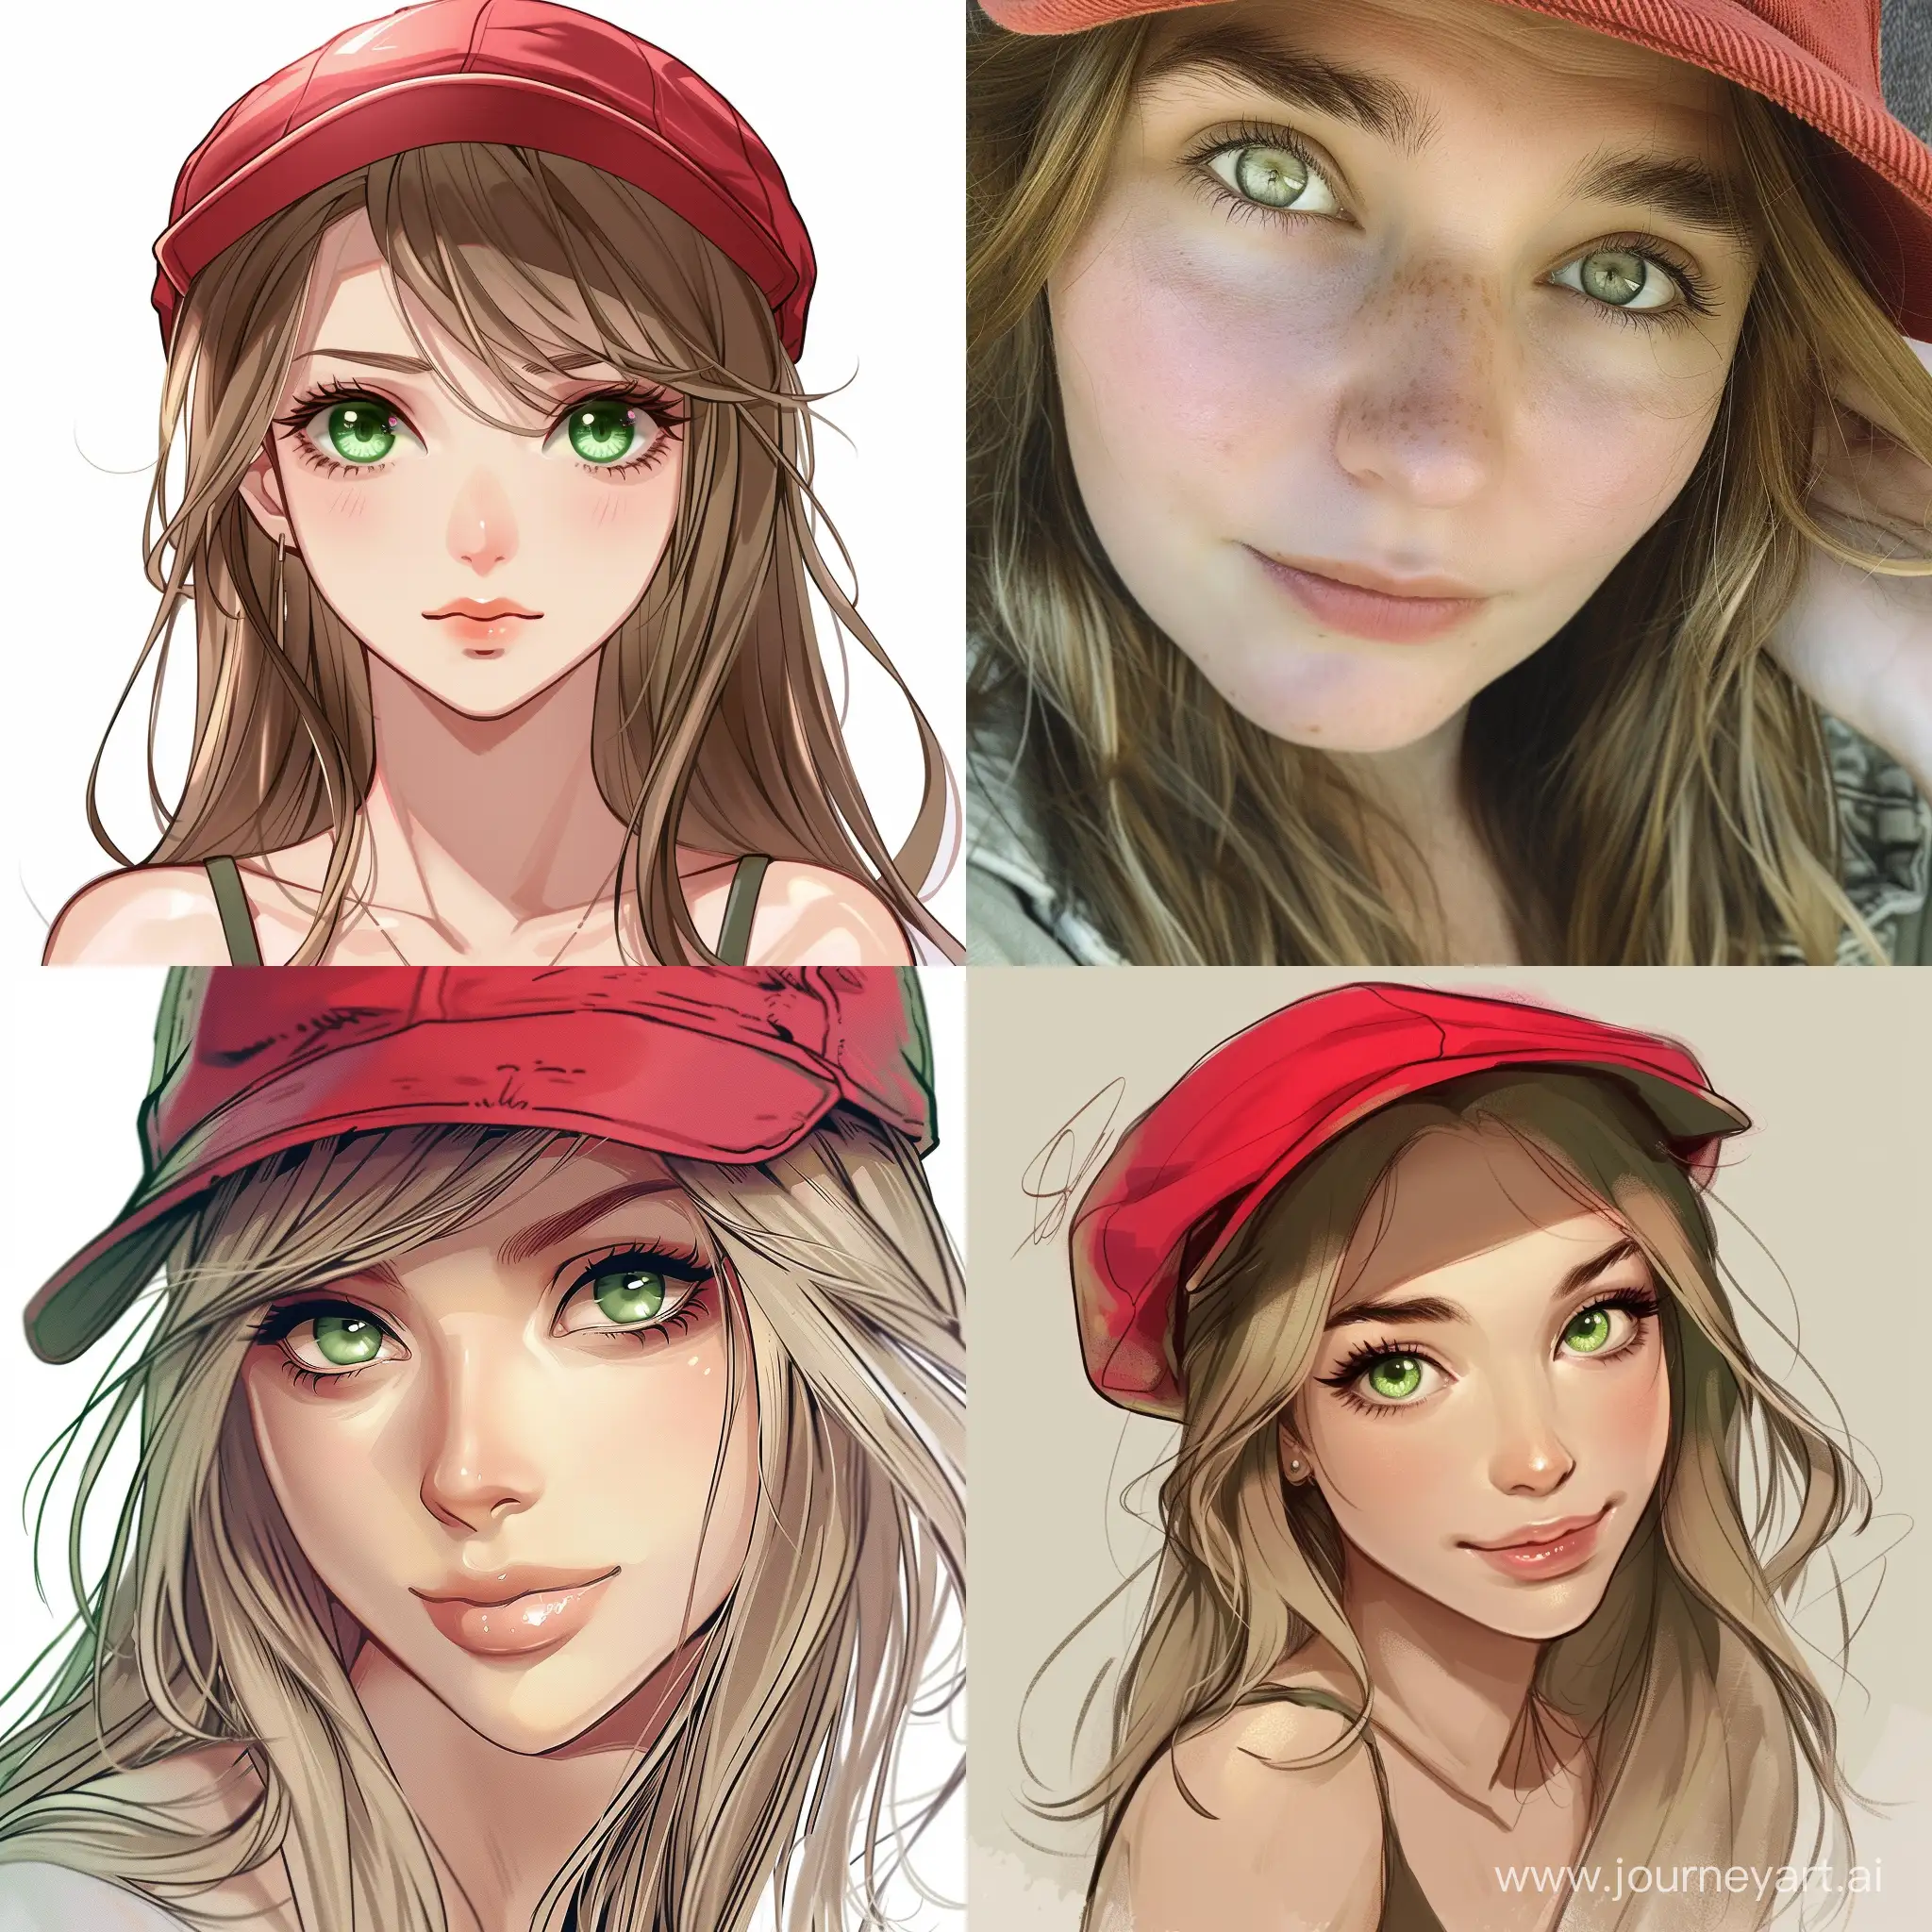 Captivating-Blonde-Woman-with-Lively-Green-Eyes-Wearing-a-Stylish-Red-Cap